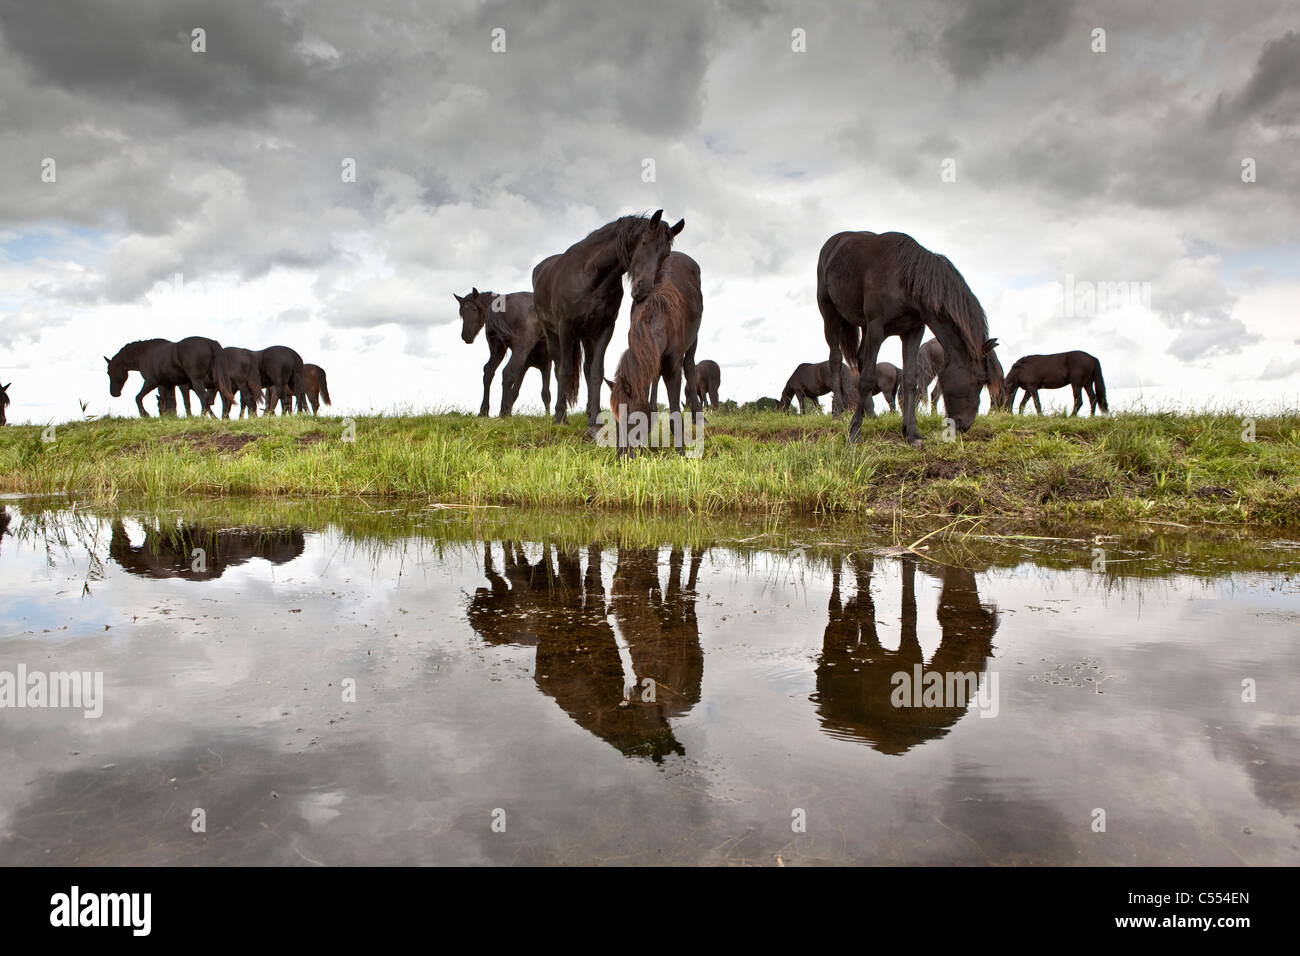 The Netherlands, Lemmer, Young Friesian horses. Stock Photo